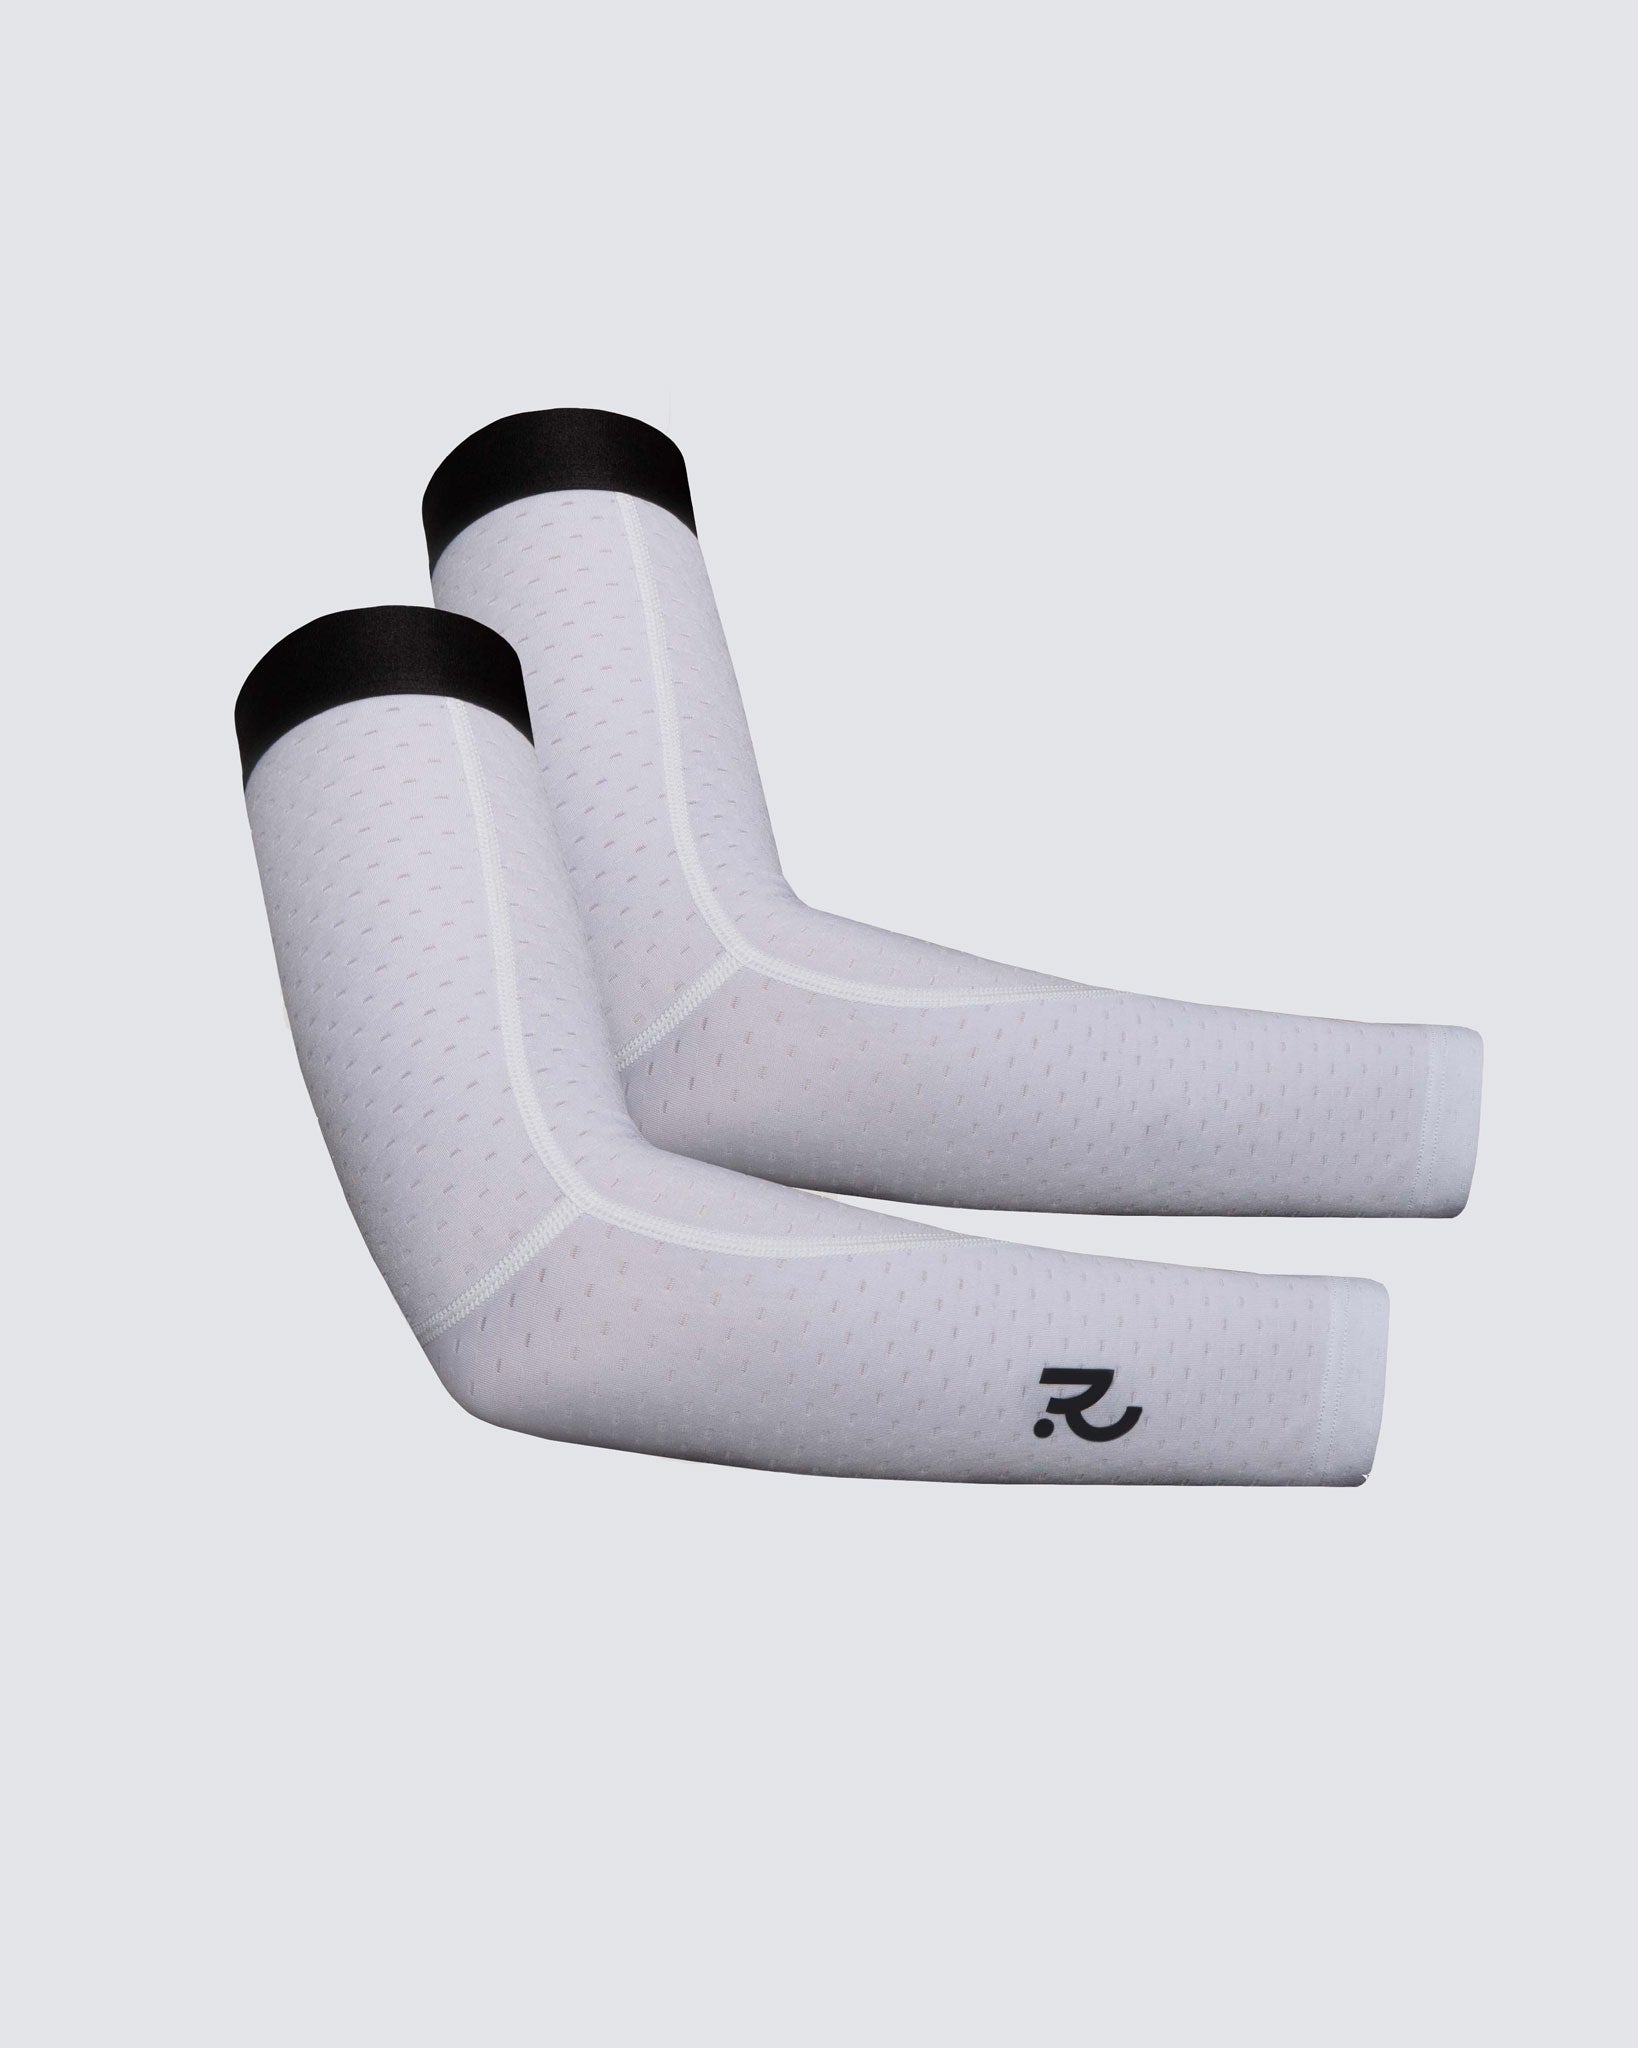 white arm warmers for cycling and endurance sports